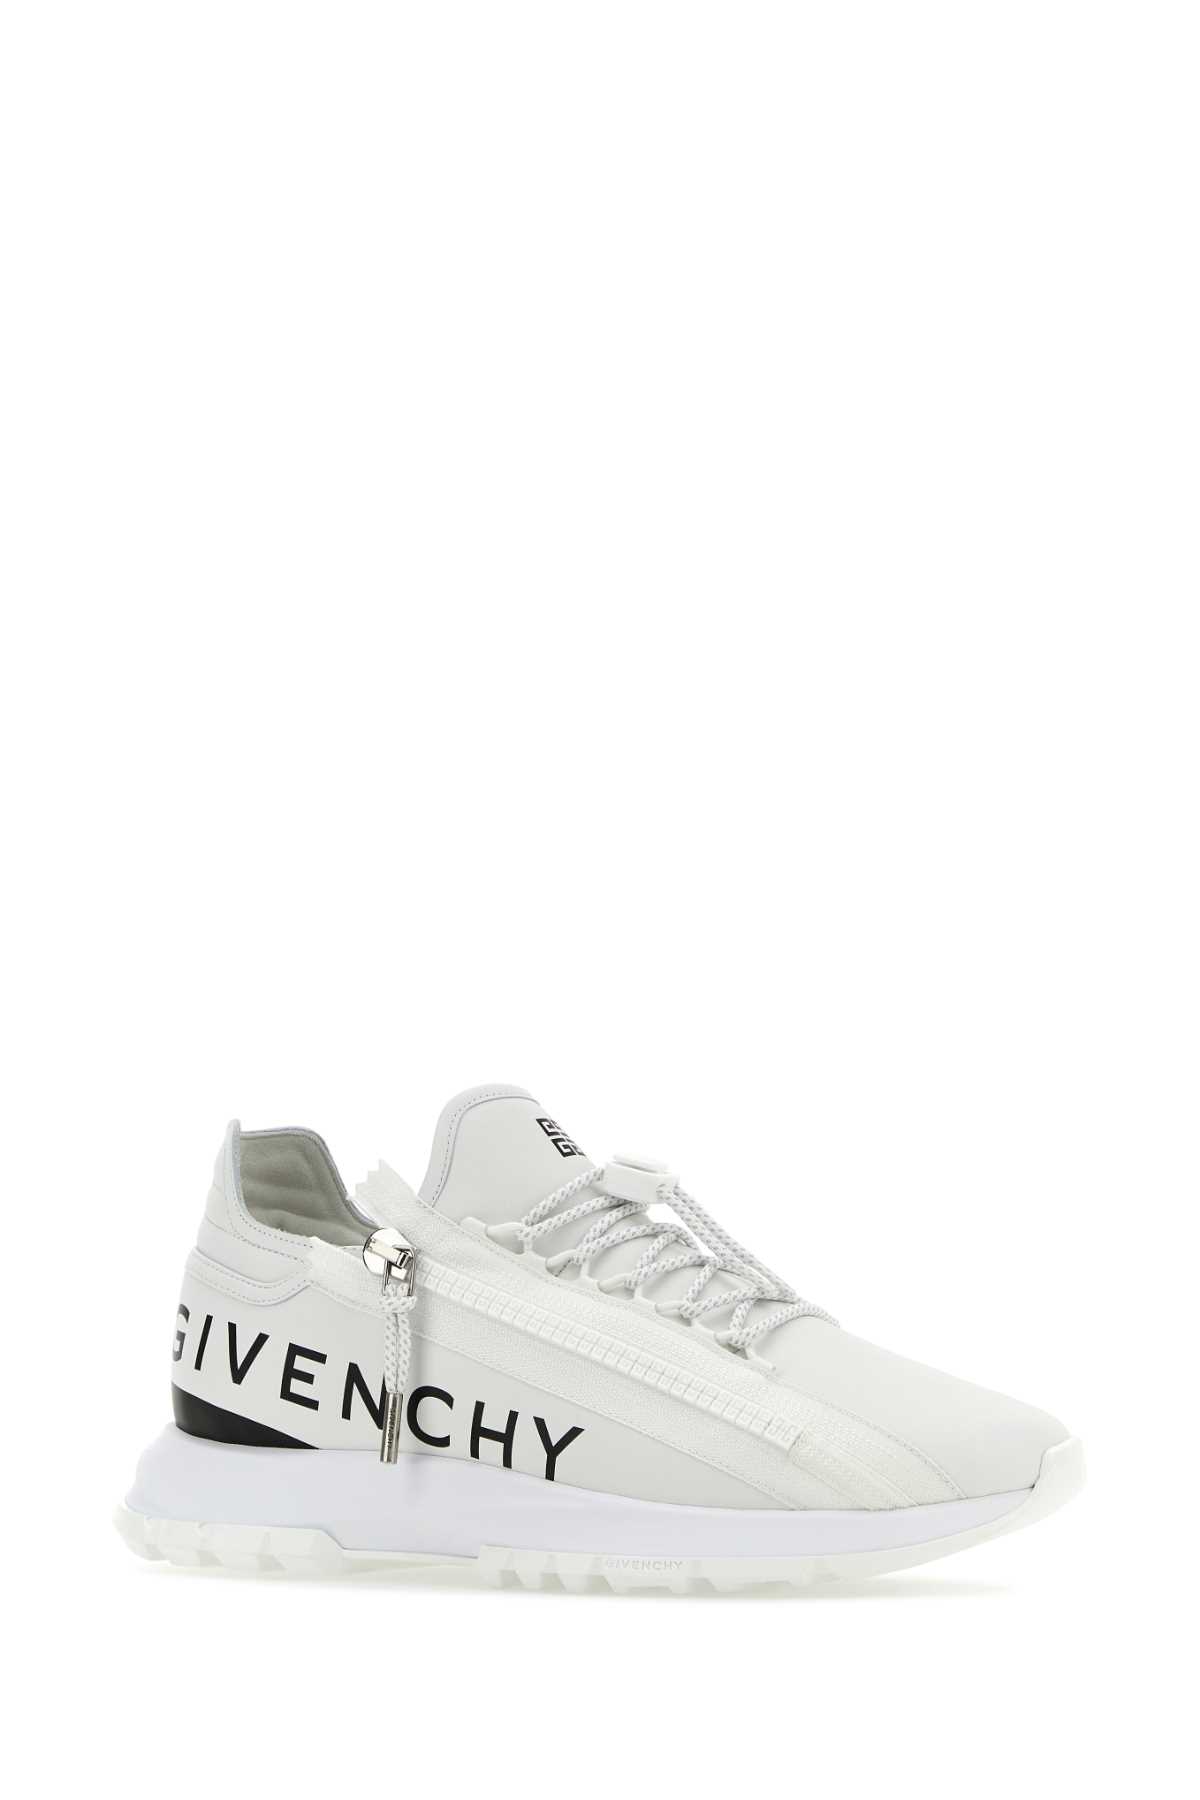 Shop Givenchy White Leather Spectre Sneakers